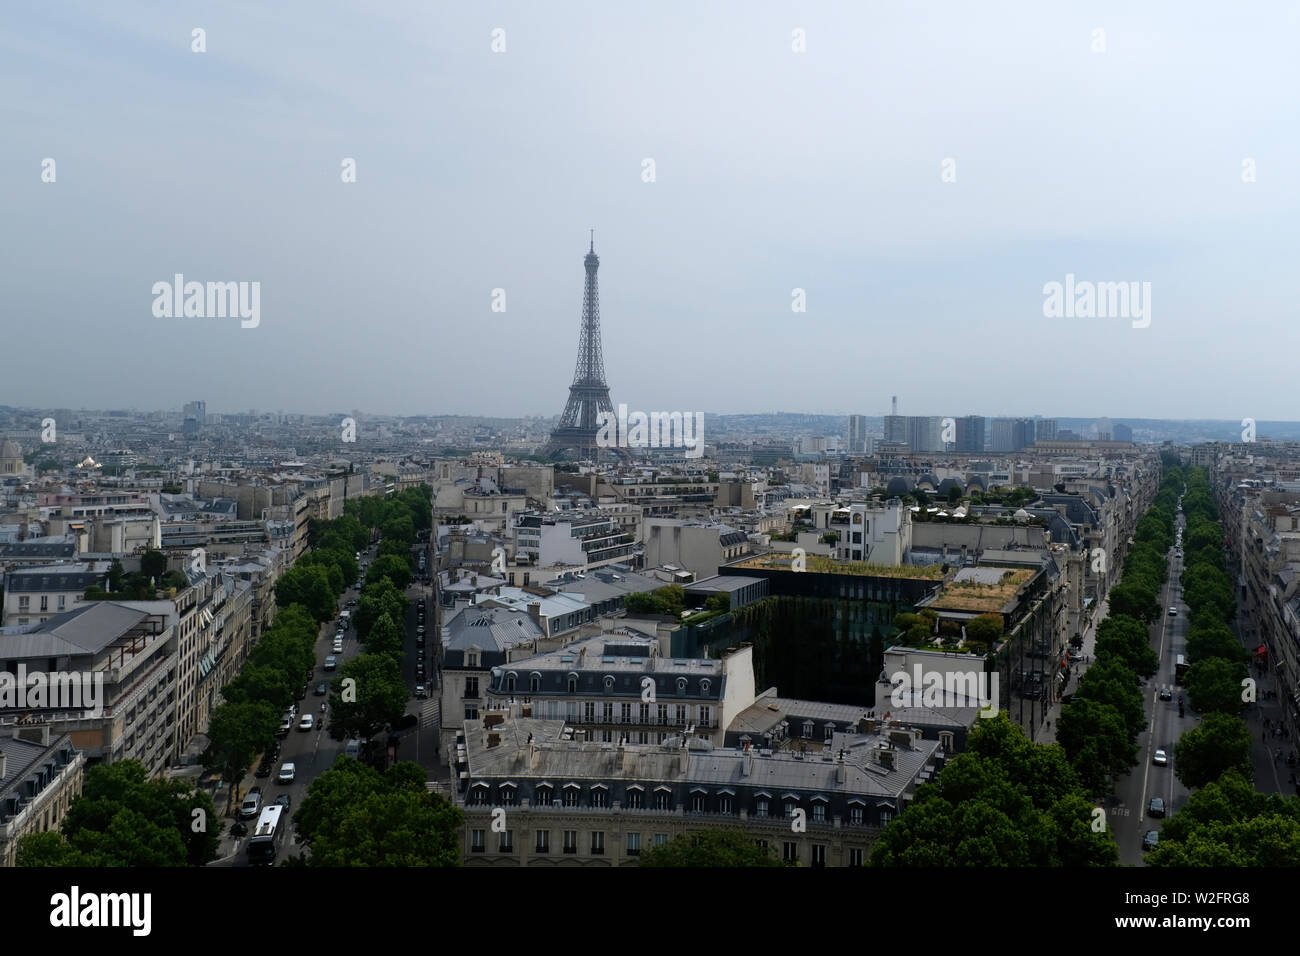 Paris and the Eiffel Tower from atop the Arc de Triomphe Stock Photo